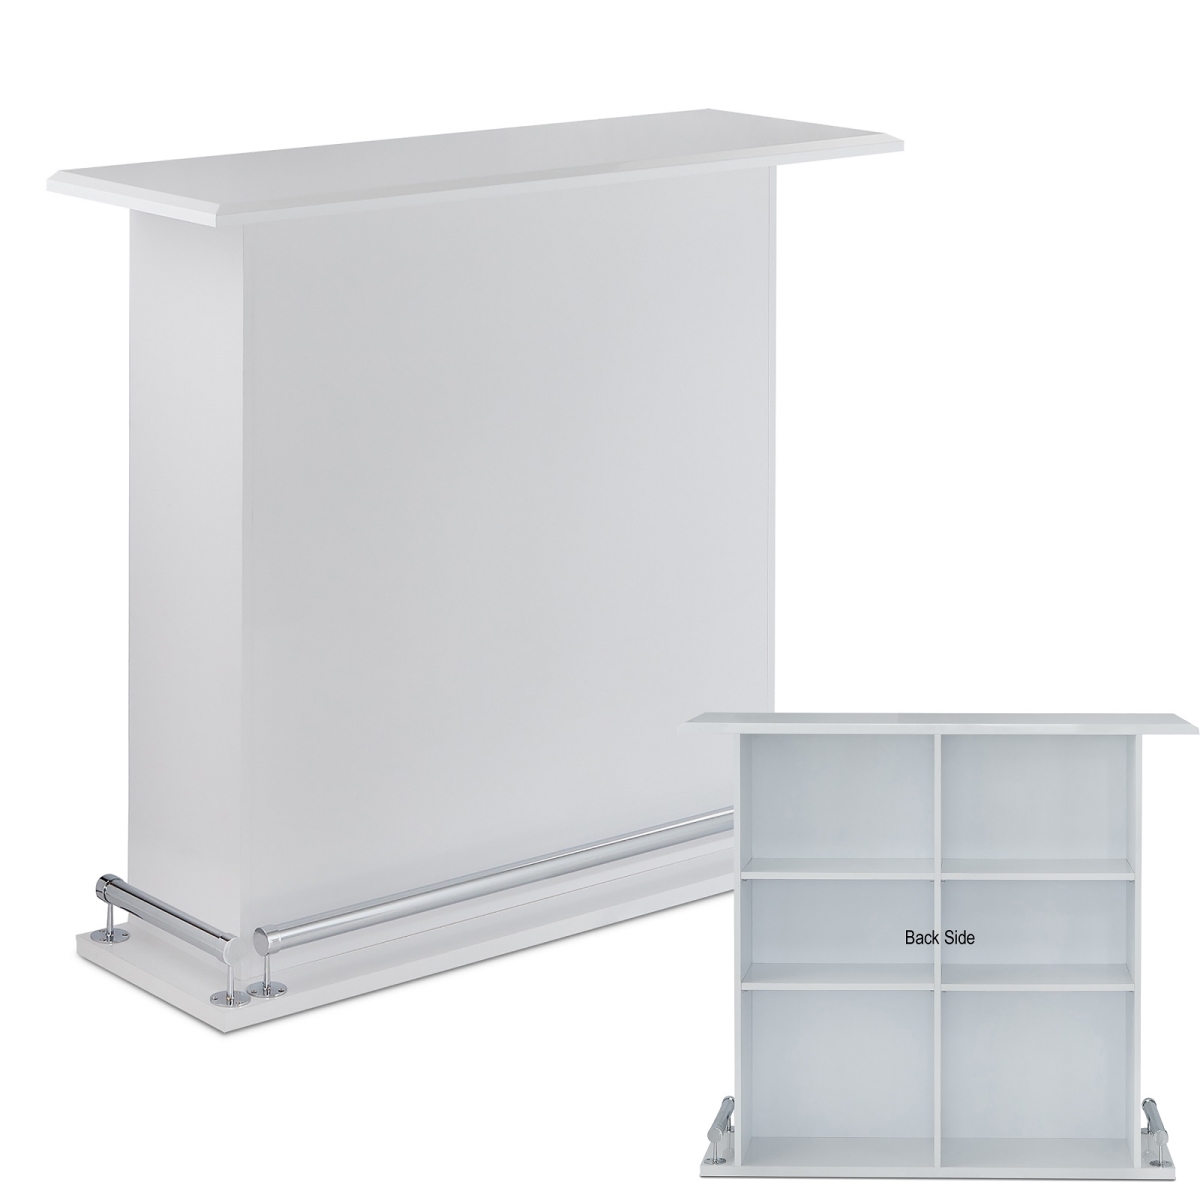 Urban Designs 4708527 High Gloss White Bar Table With Back Open Storage, 41 X 16 X 47 In.